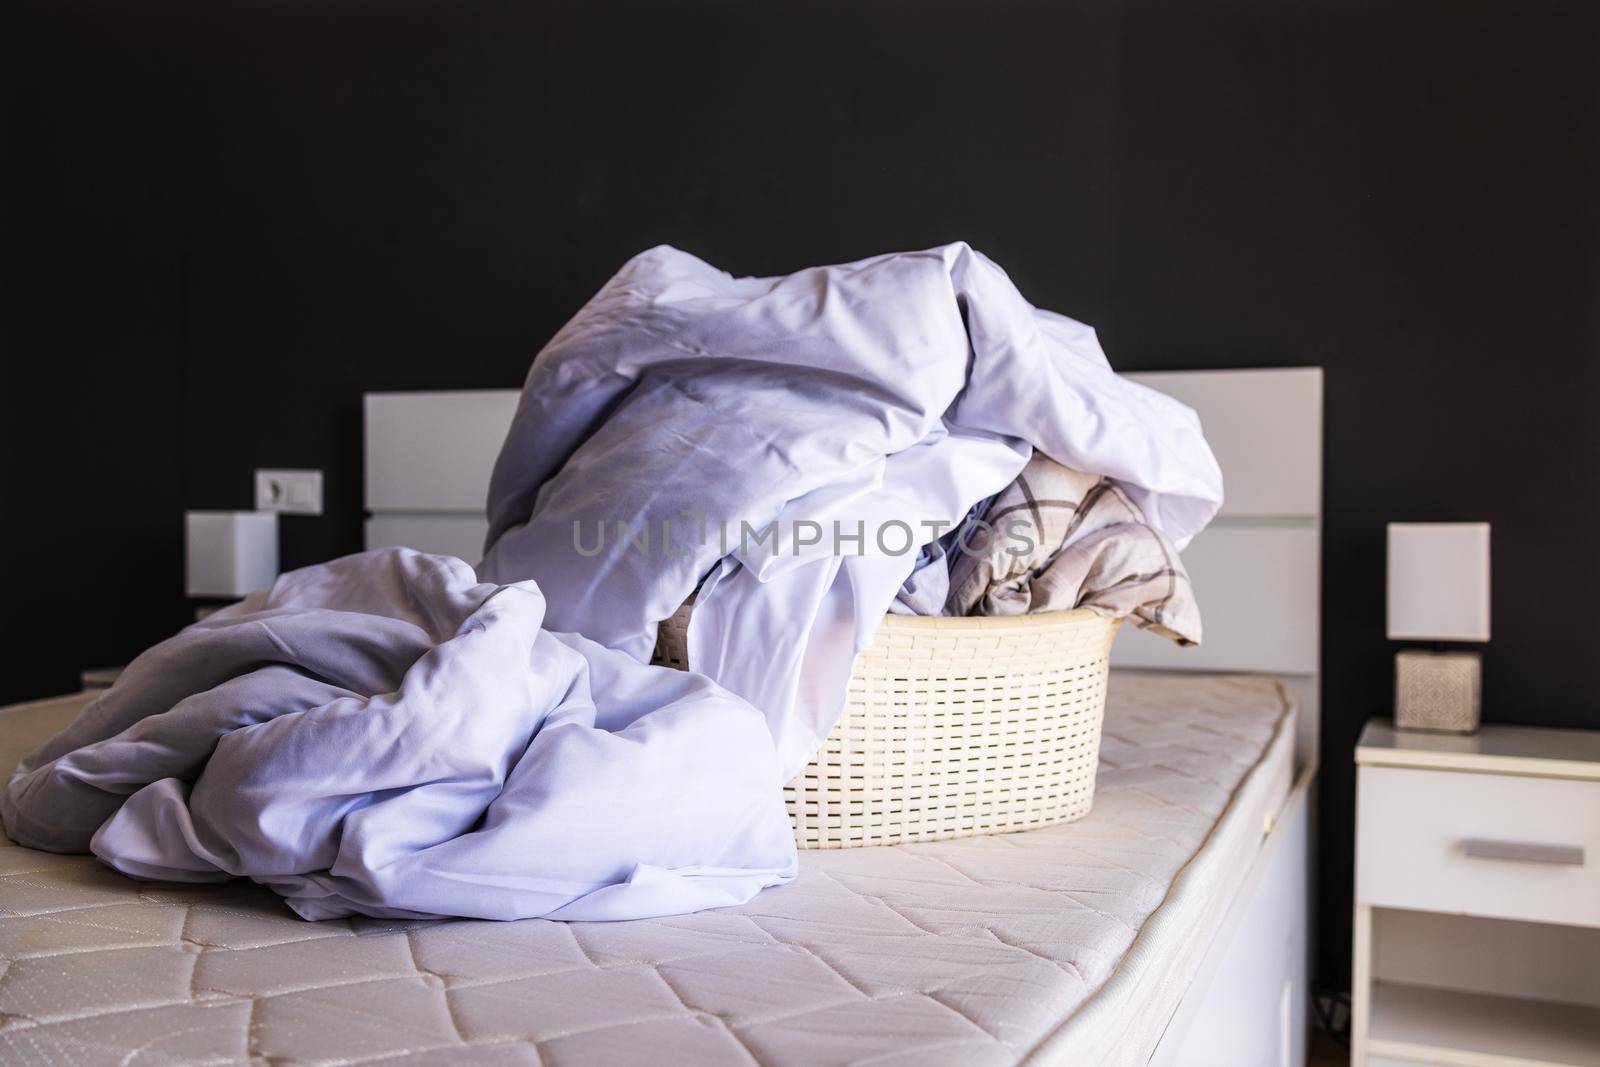 A large pile of dirty linen on the bed is collected in a basin to be washed. The concept of homework, cleaning in the apartment, studio, apartment booking. Laundry concept, liquid bed linen detergent